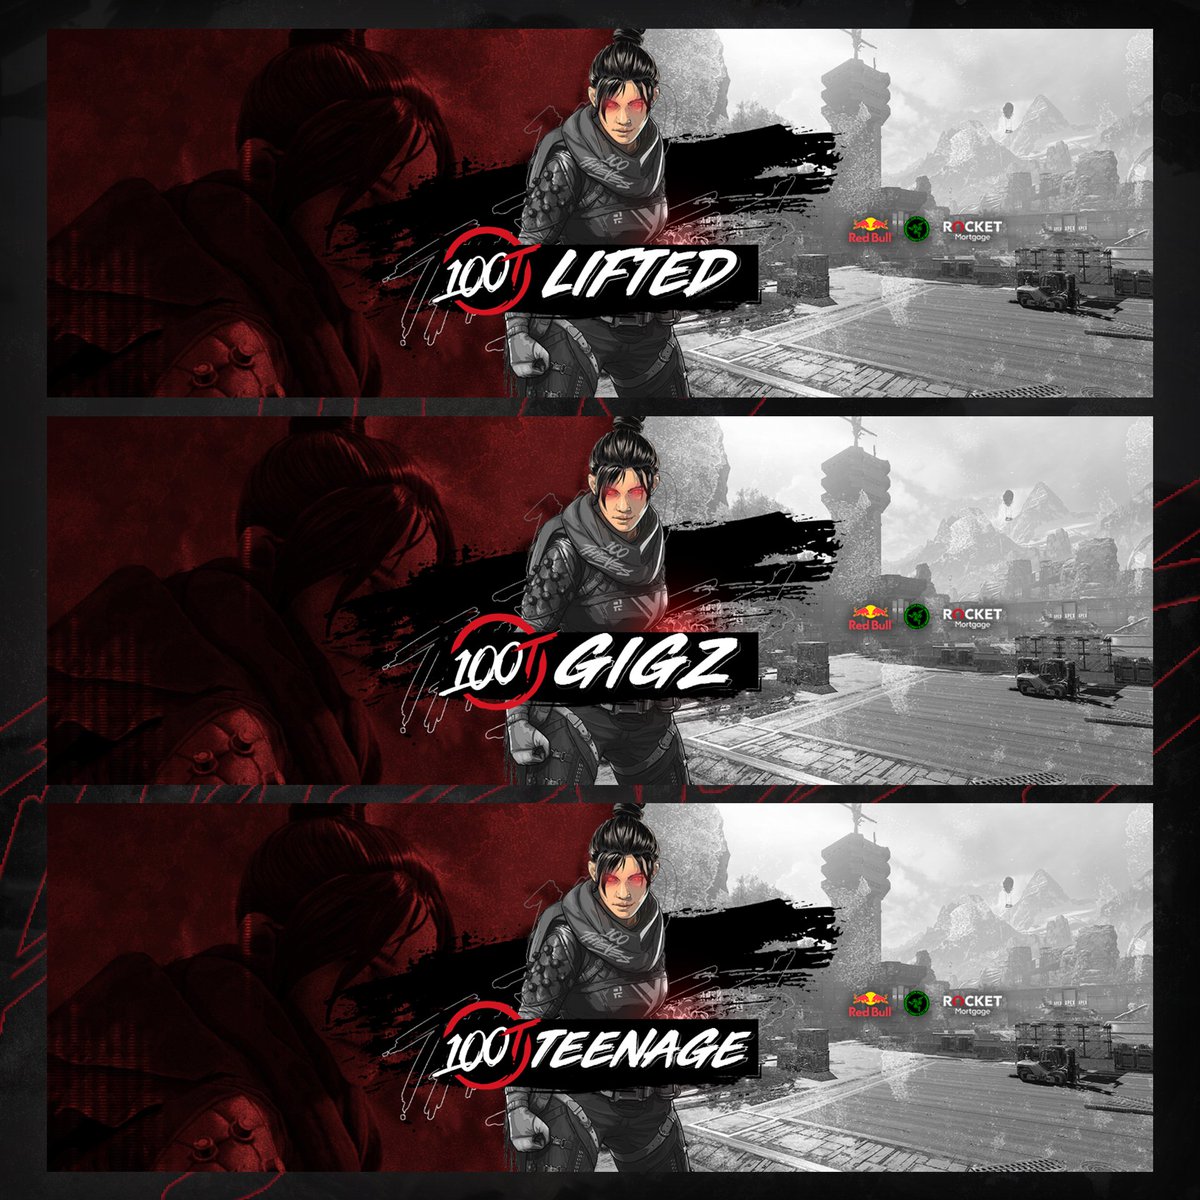 Scopes Banners For 100thieves S Apex Legends Rts Likes Are Very Appreciated 100thieves 100t Lifted Gigz Teenage T Co Qn5vg4t4fn